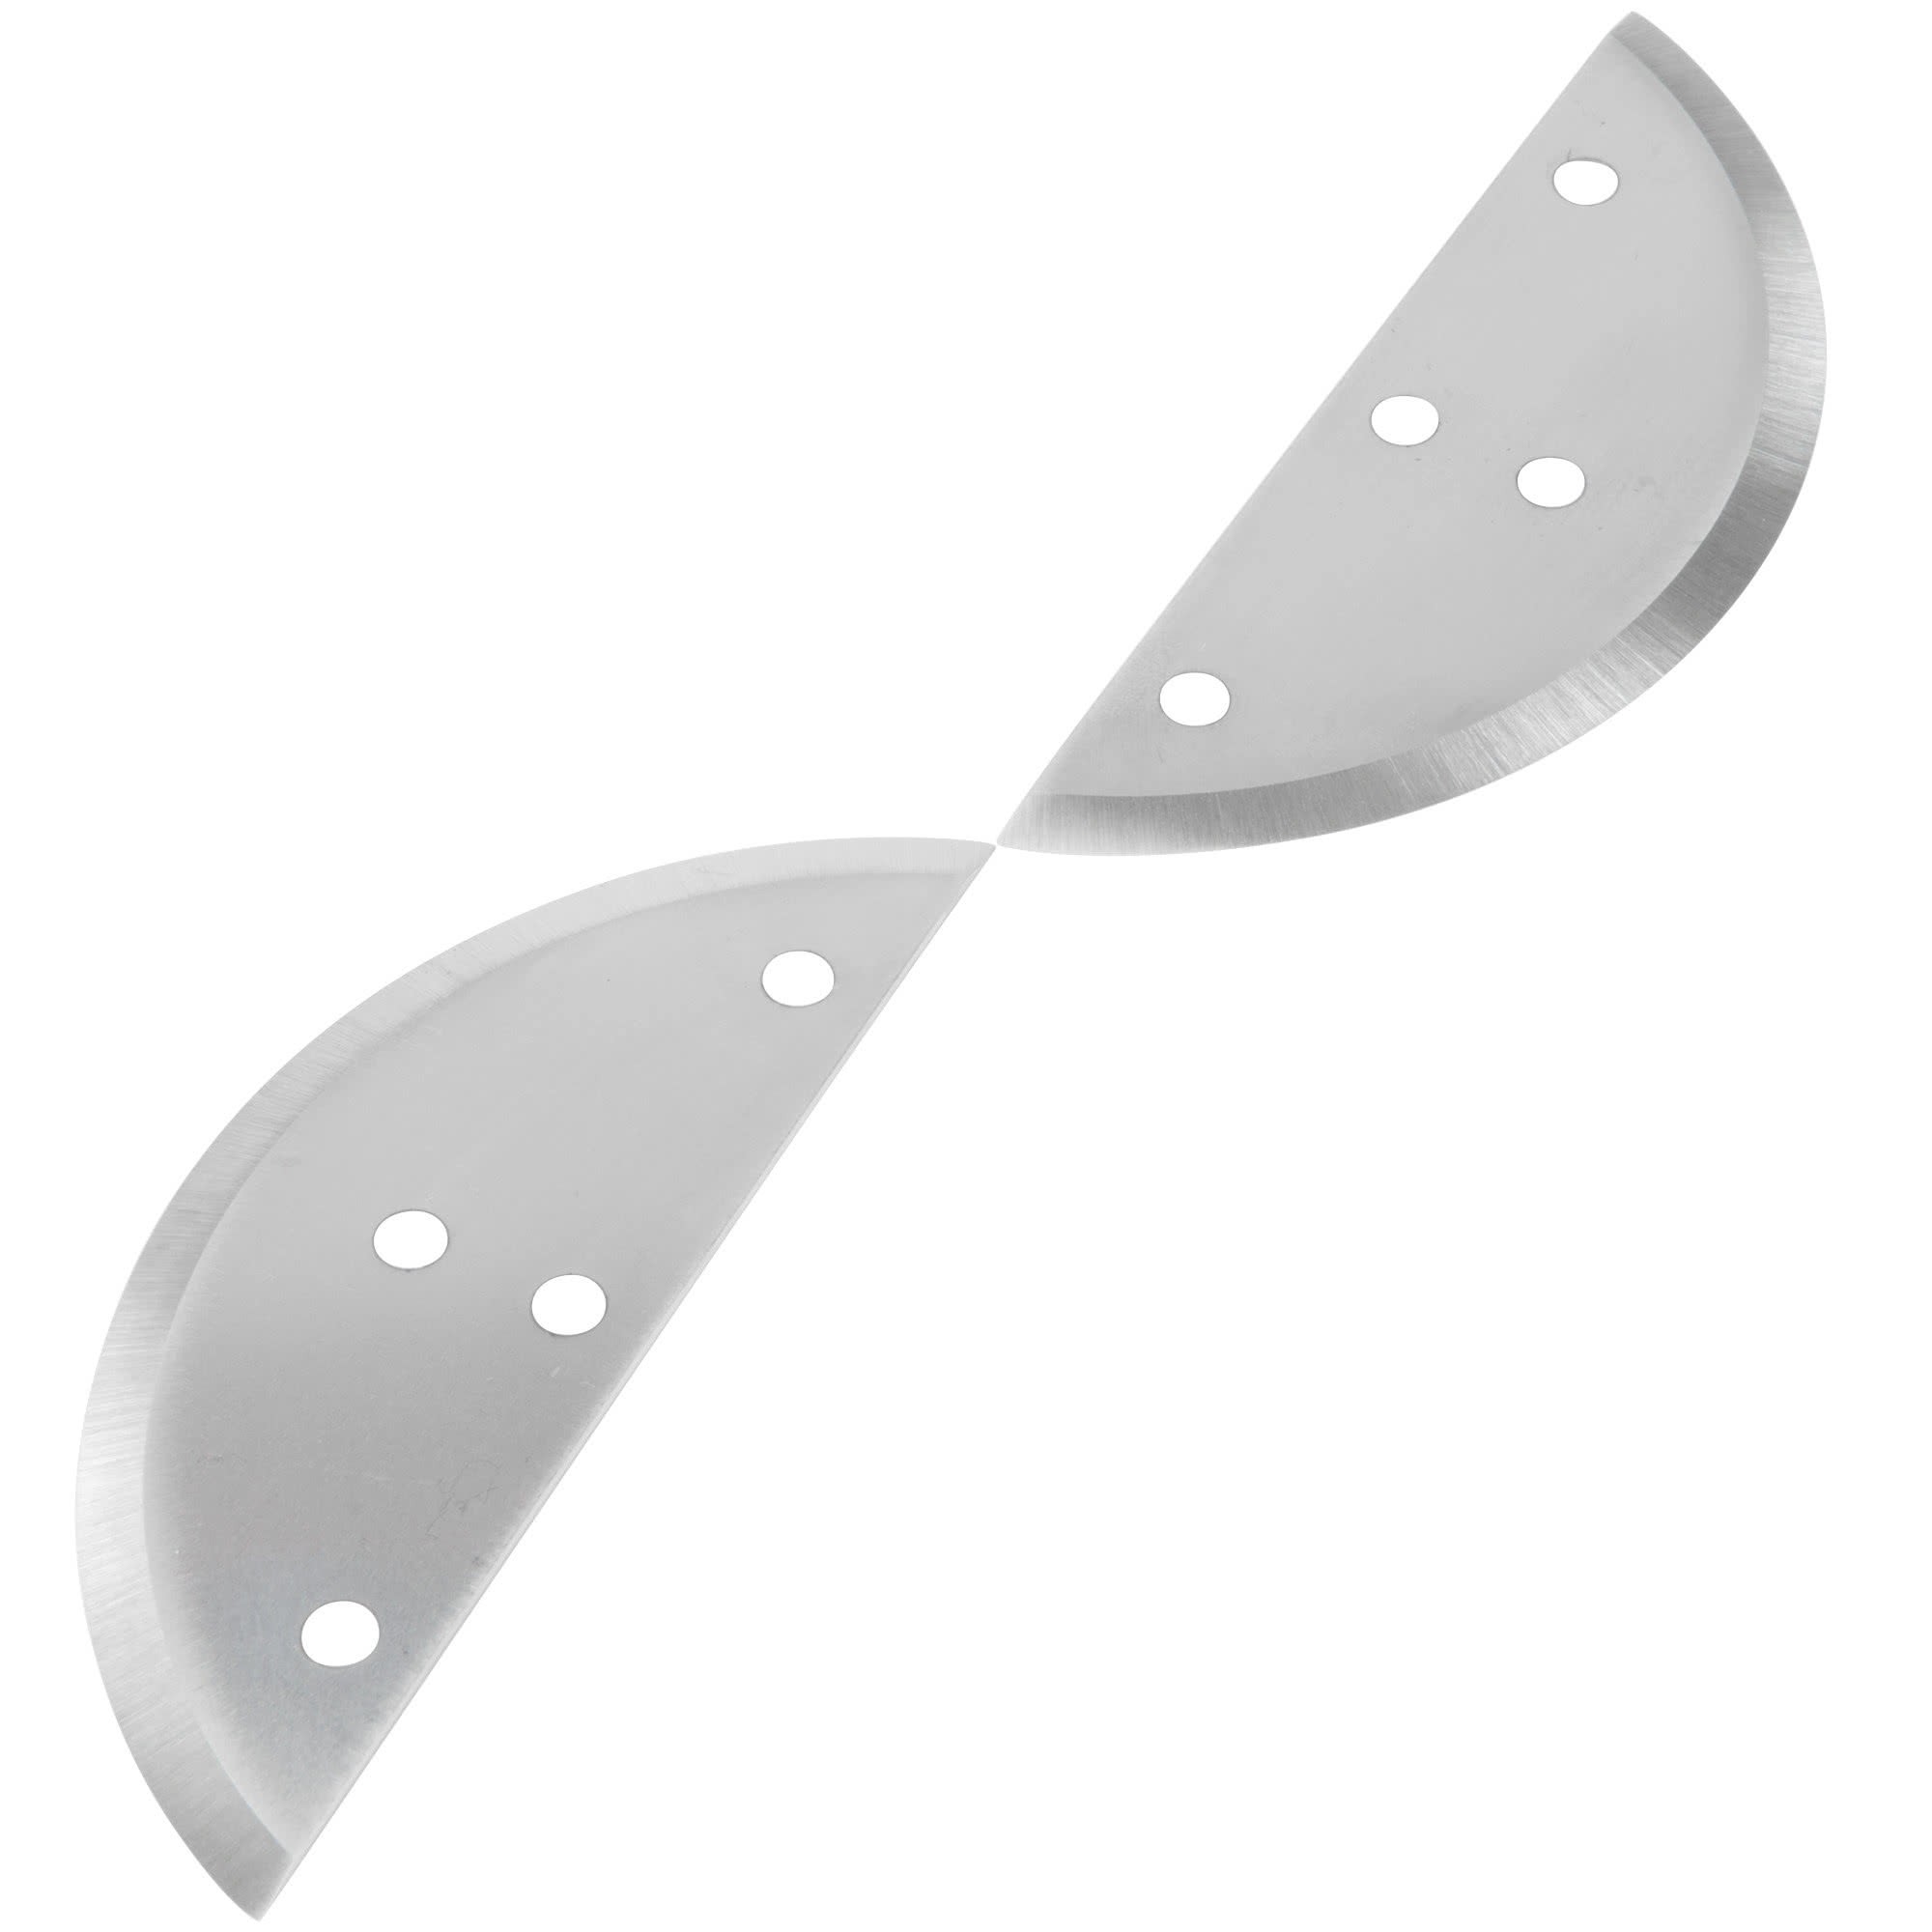 Nemco 55135 Replacement Adjustable Blade for Easy Slicer